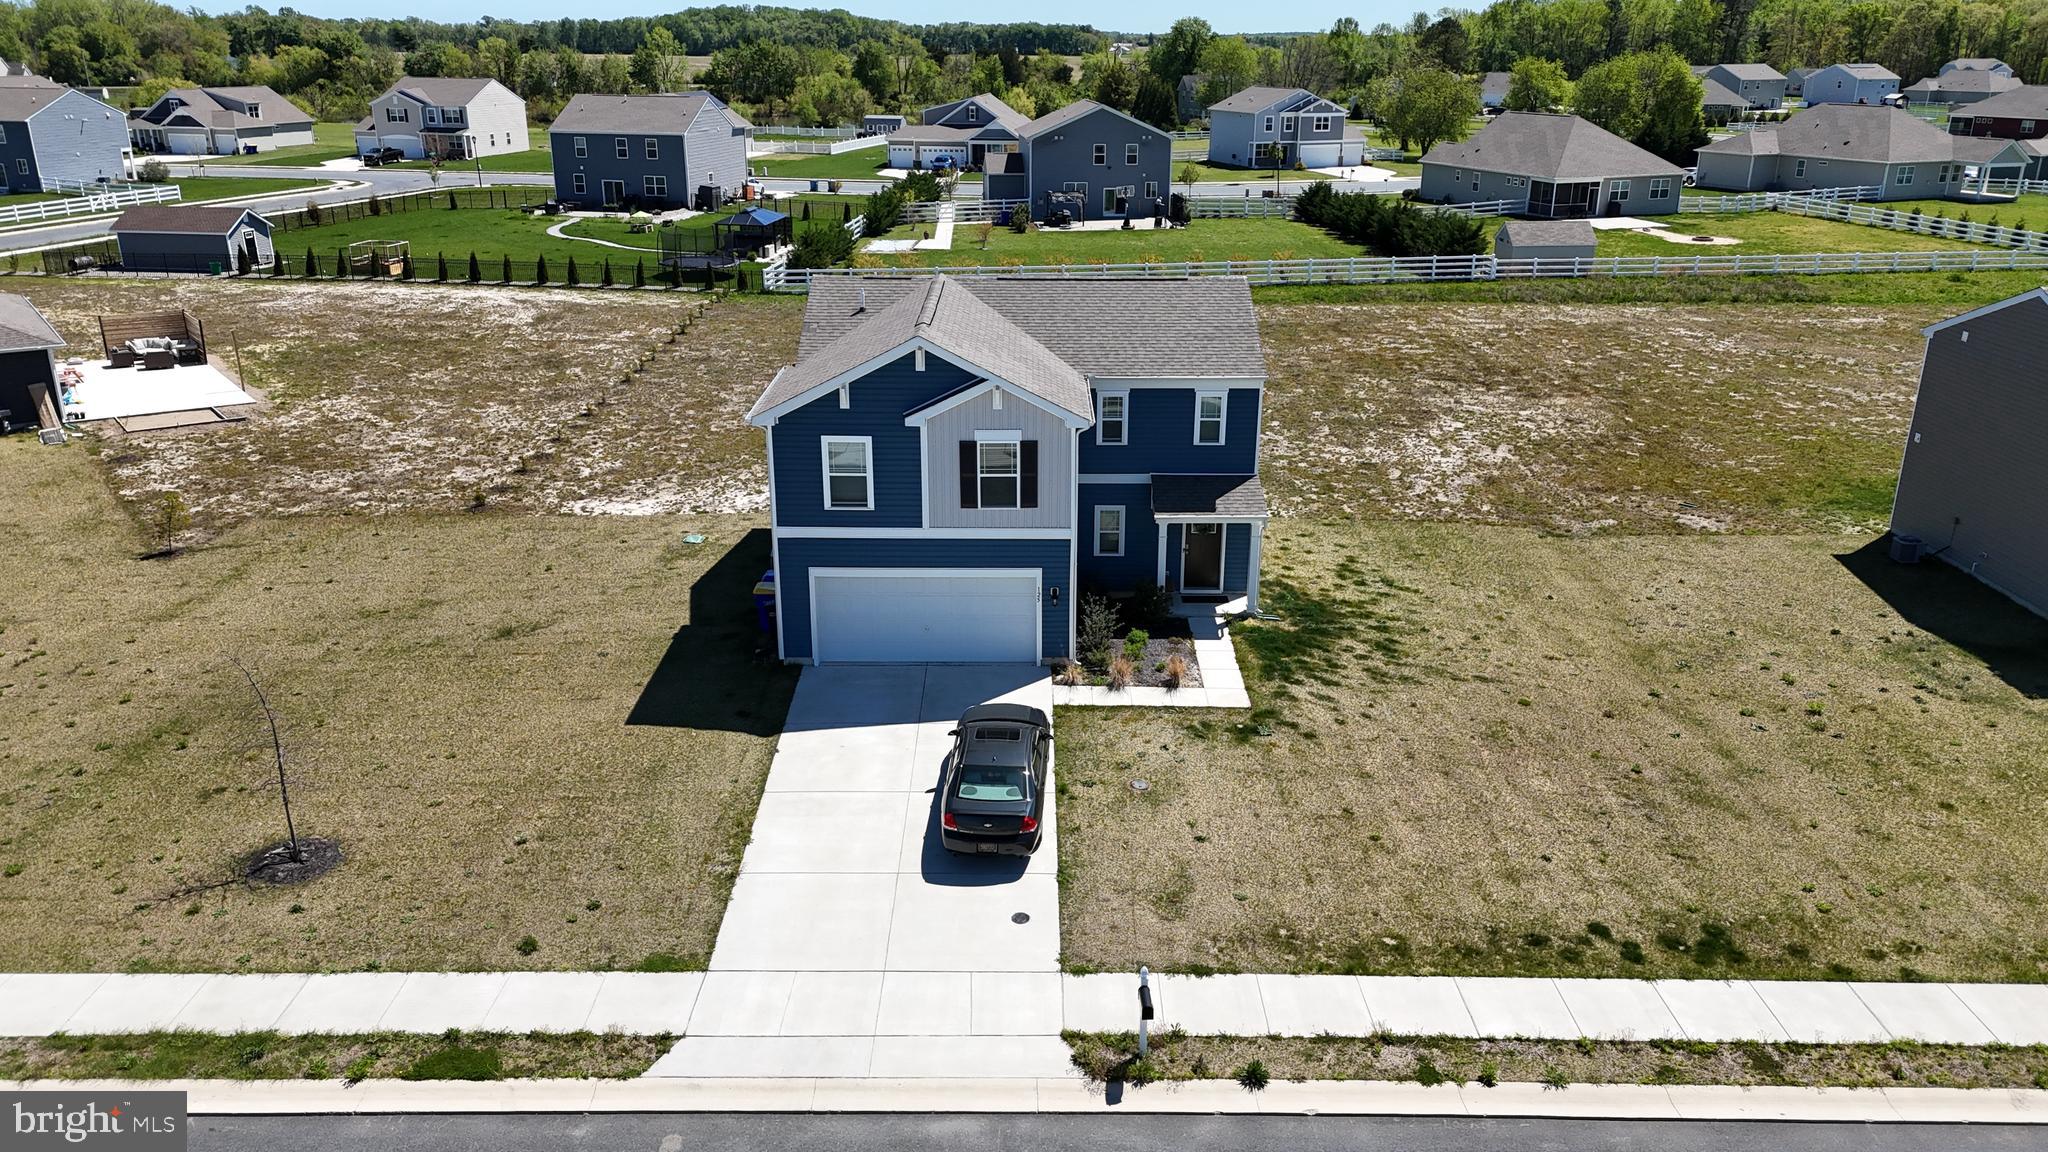 a aerial view of a house with outdoor space